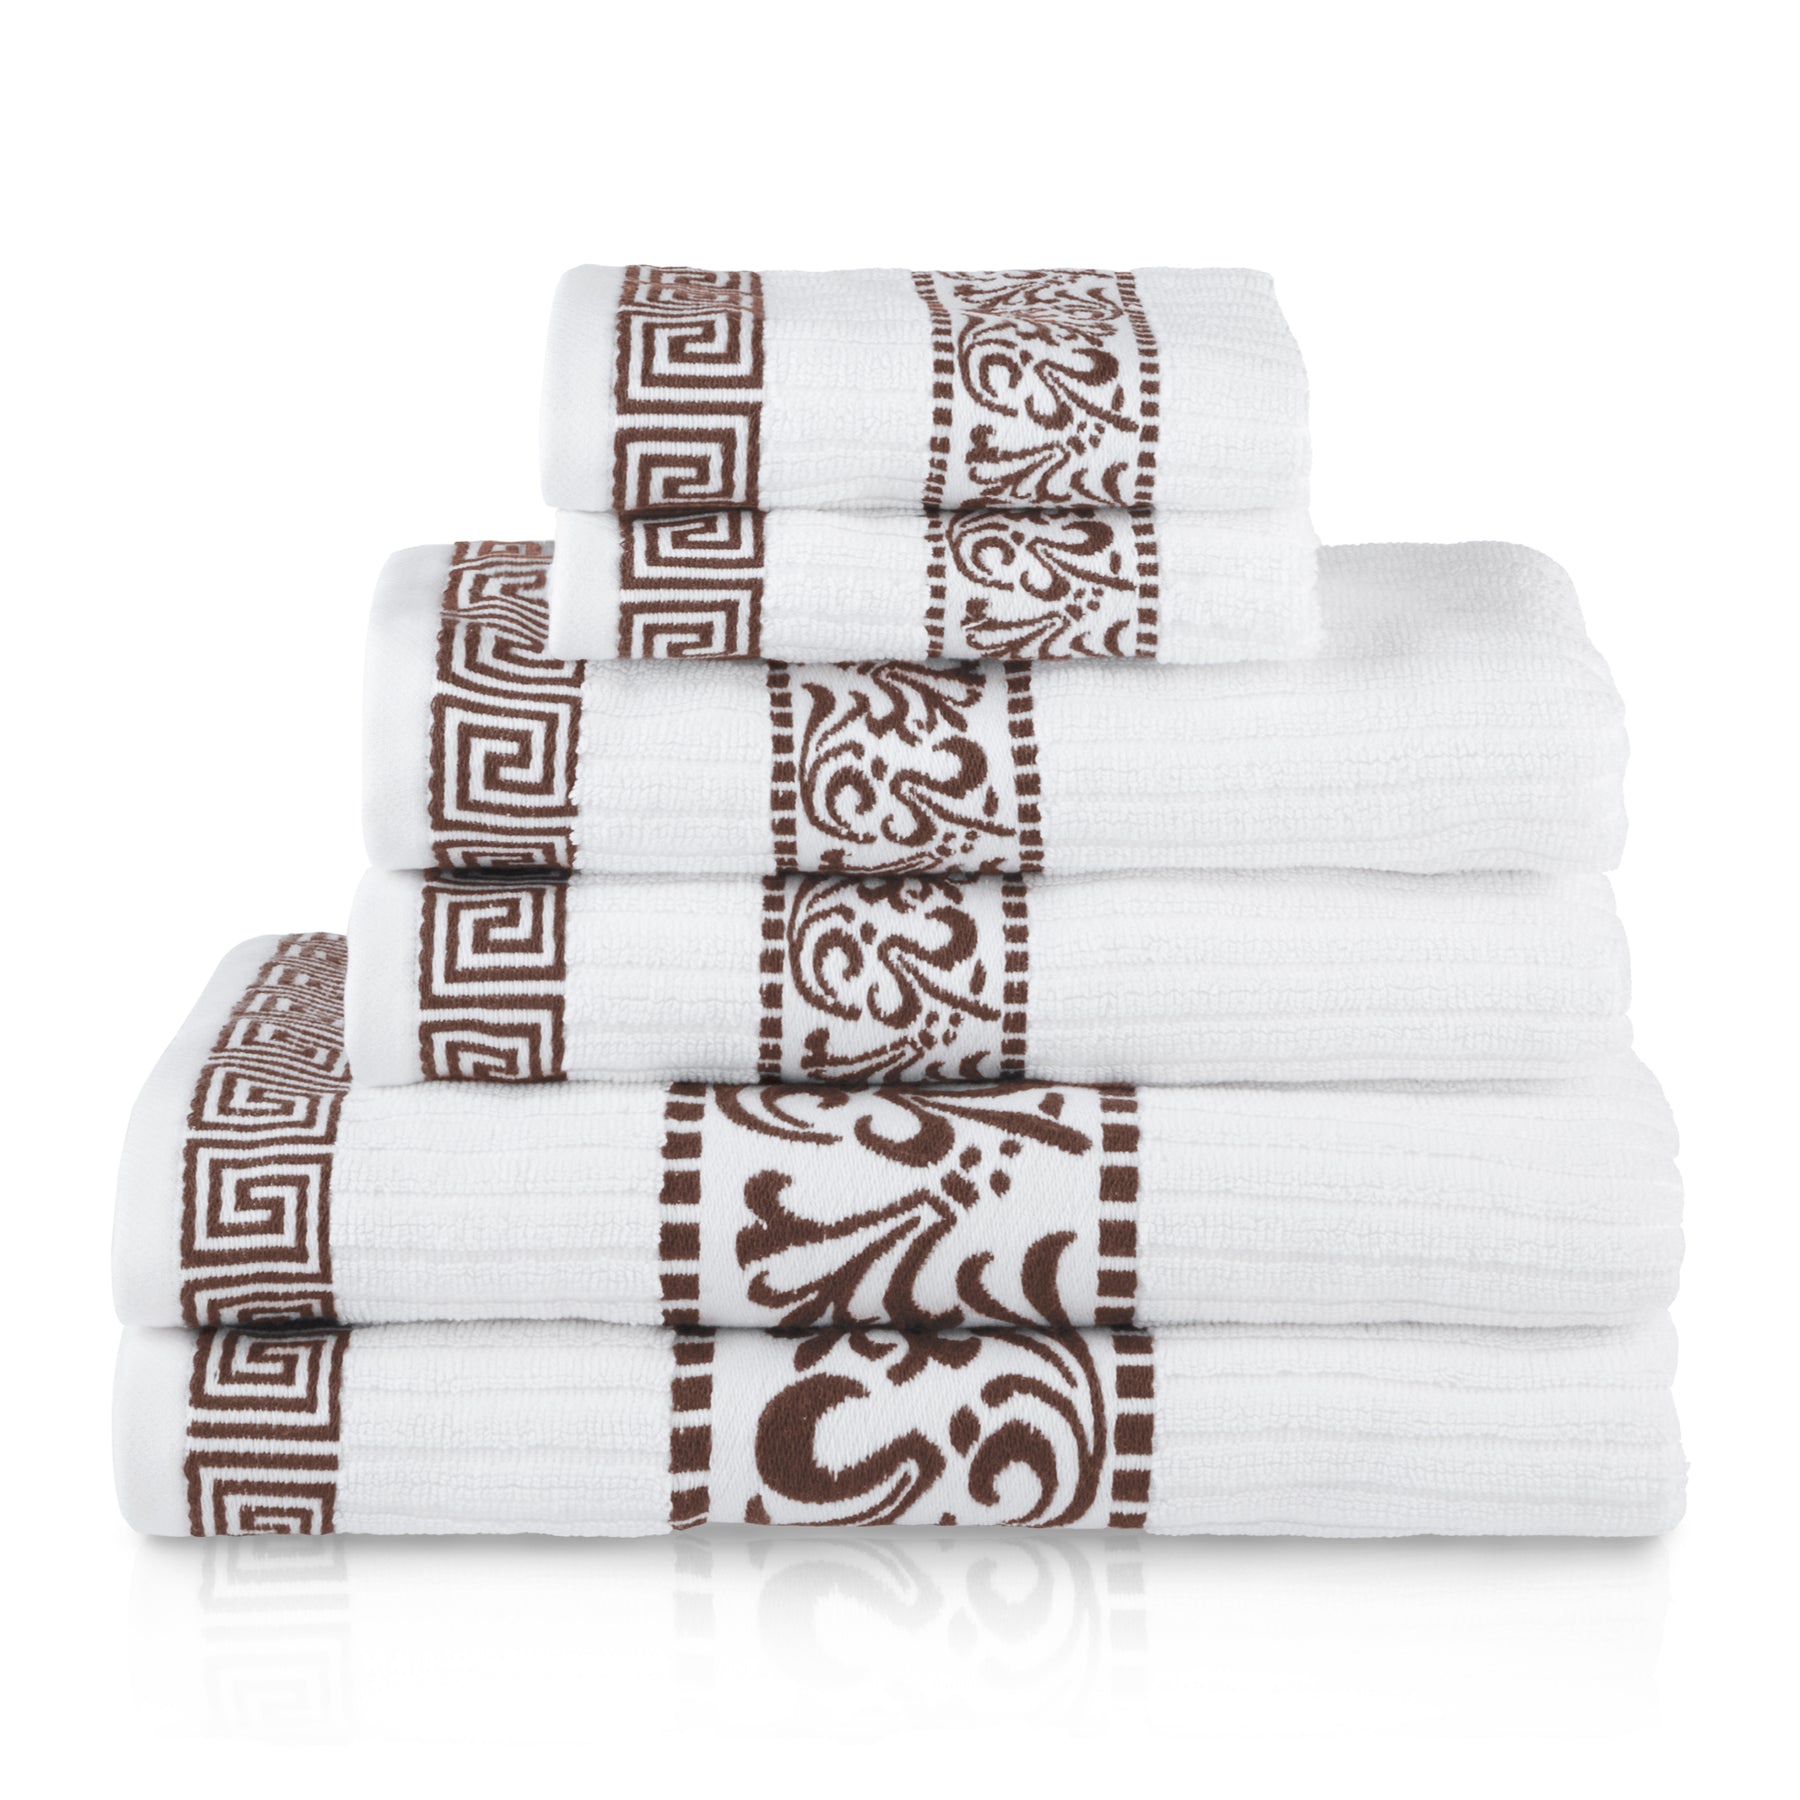 Superior Athens Cotton 6-Piece Assorted Towel Set with Greek Scroll and Floral Pattern - Chocolate